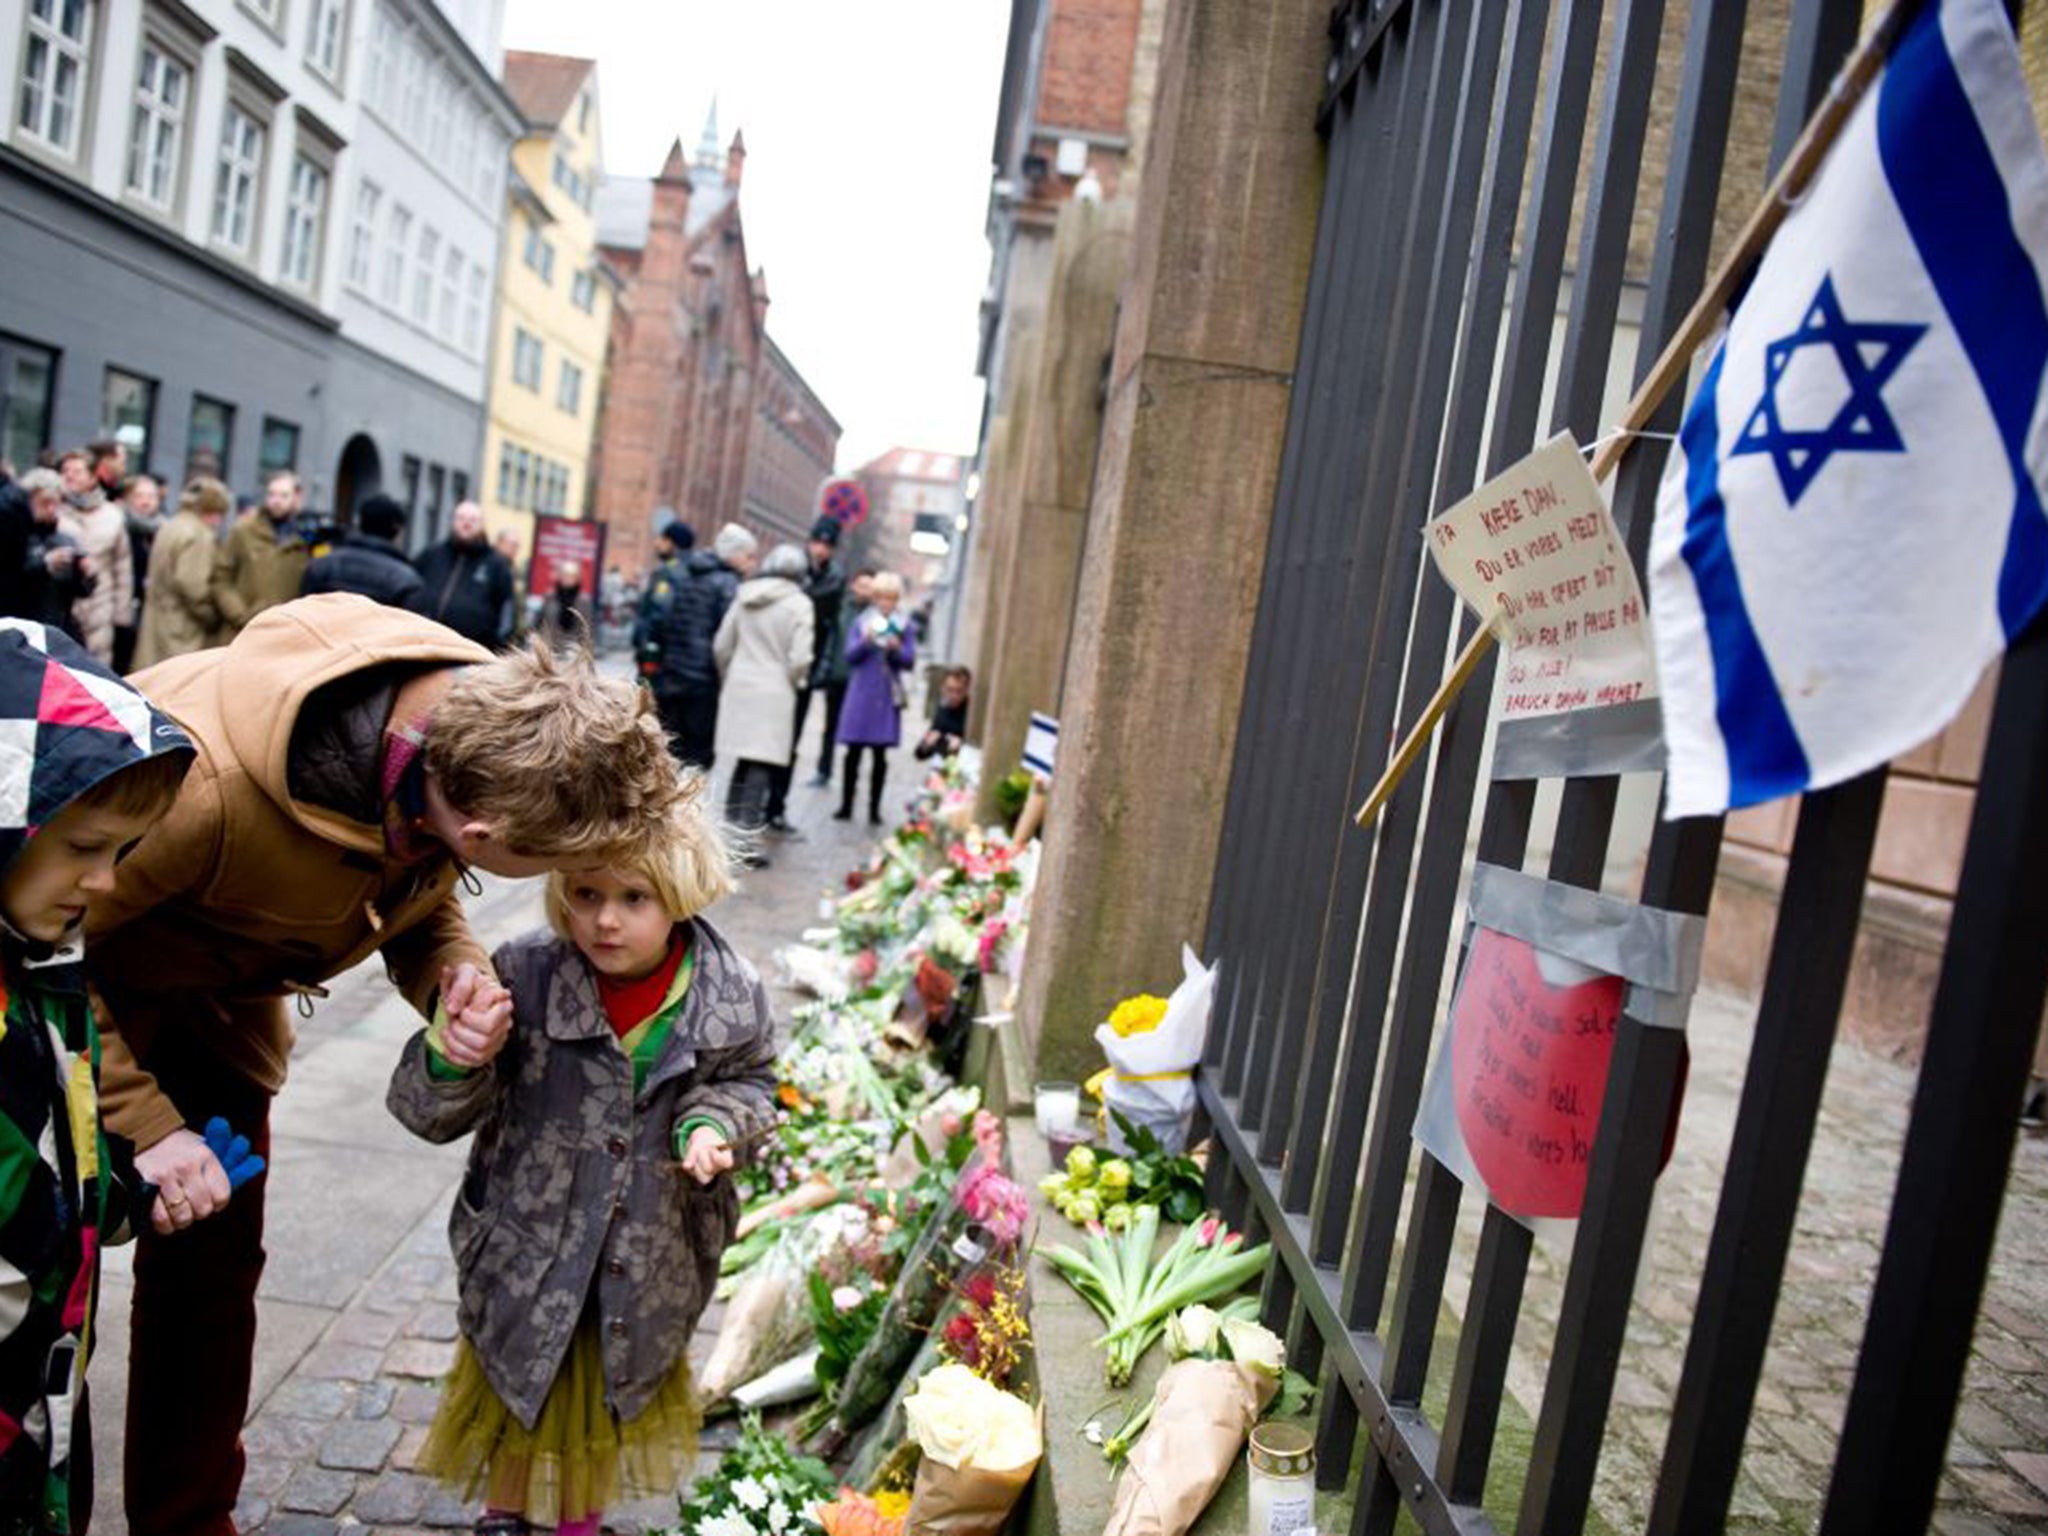 Tributes outside the synagogue where Dan Uzan was killed on Sunday in Copenhagen